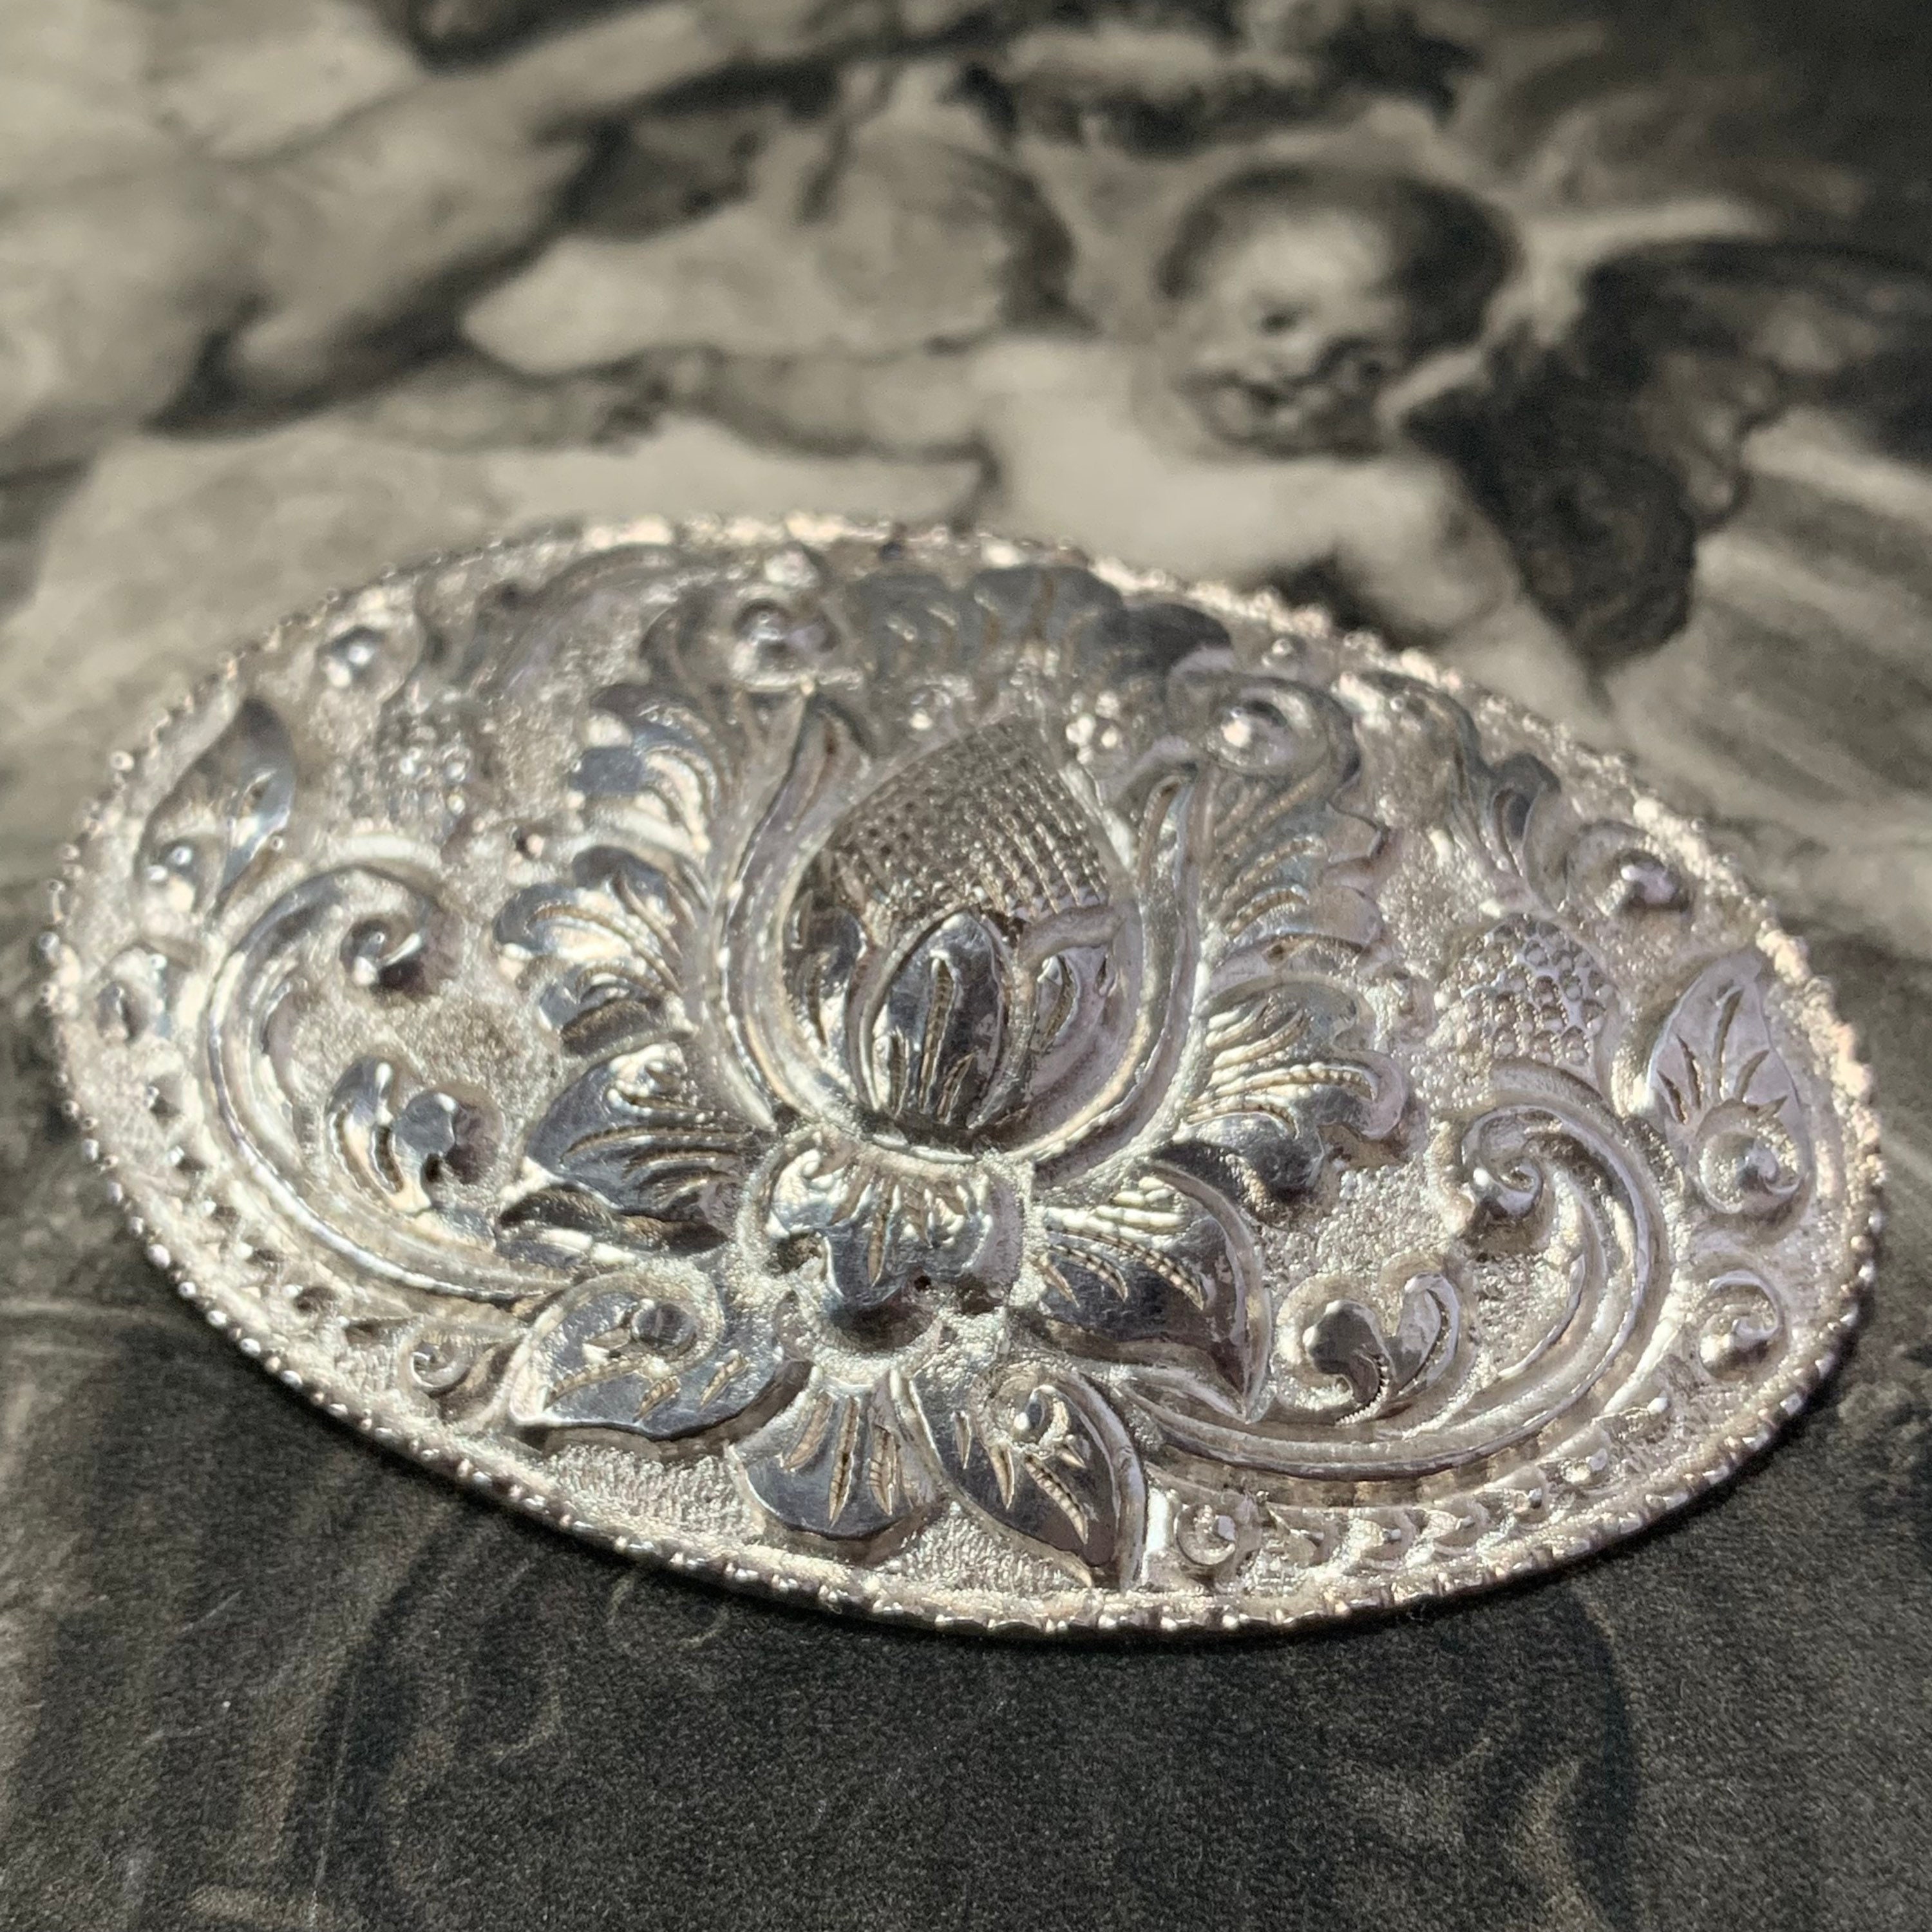 Scottish Thistle Silver Brooch From The Early 1900S. A Wonderful & Meaningful Keepsake, Perfect For Commemorating A Special Occasion